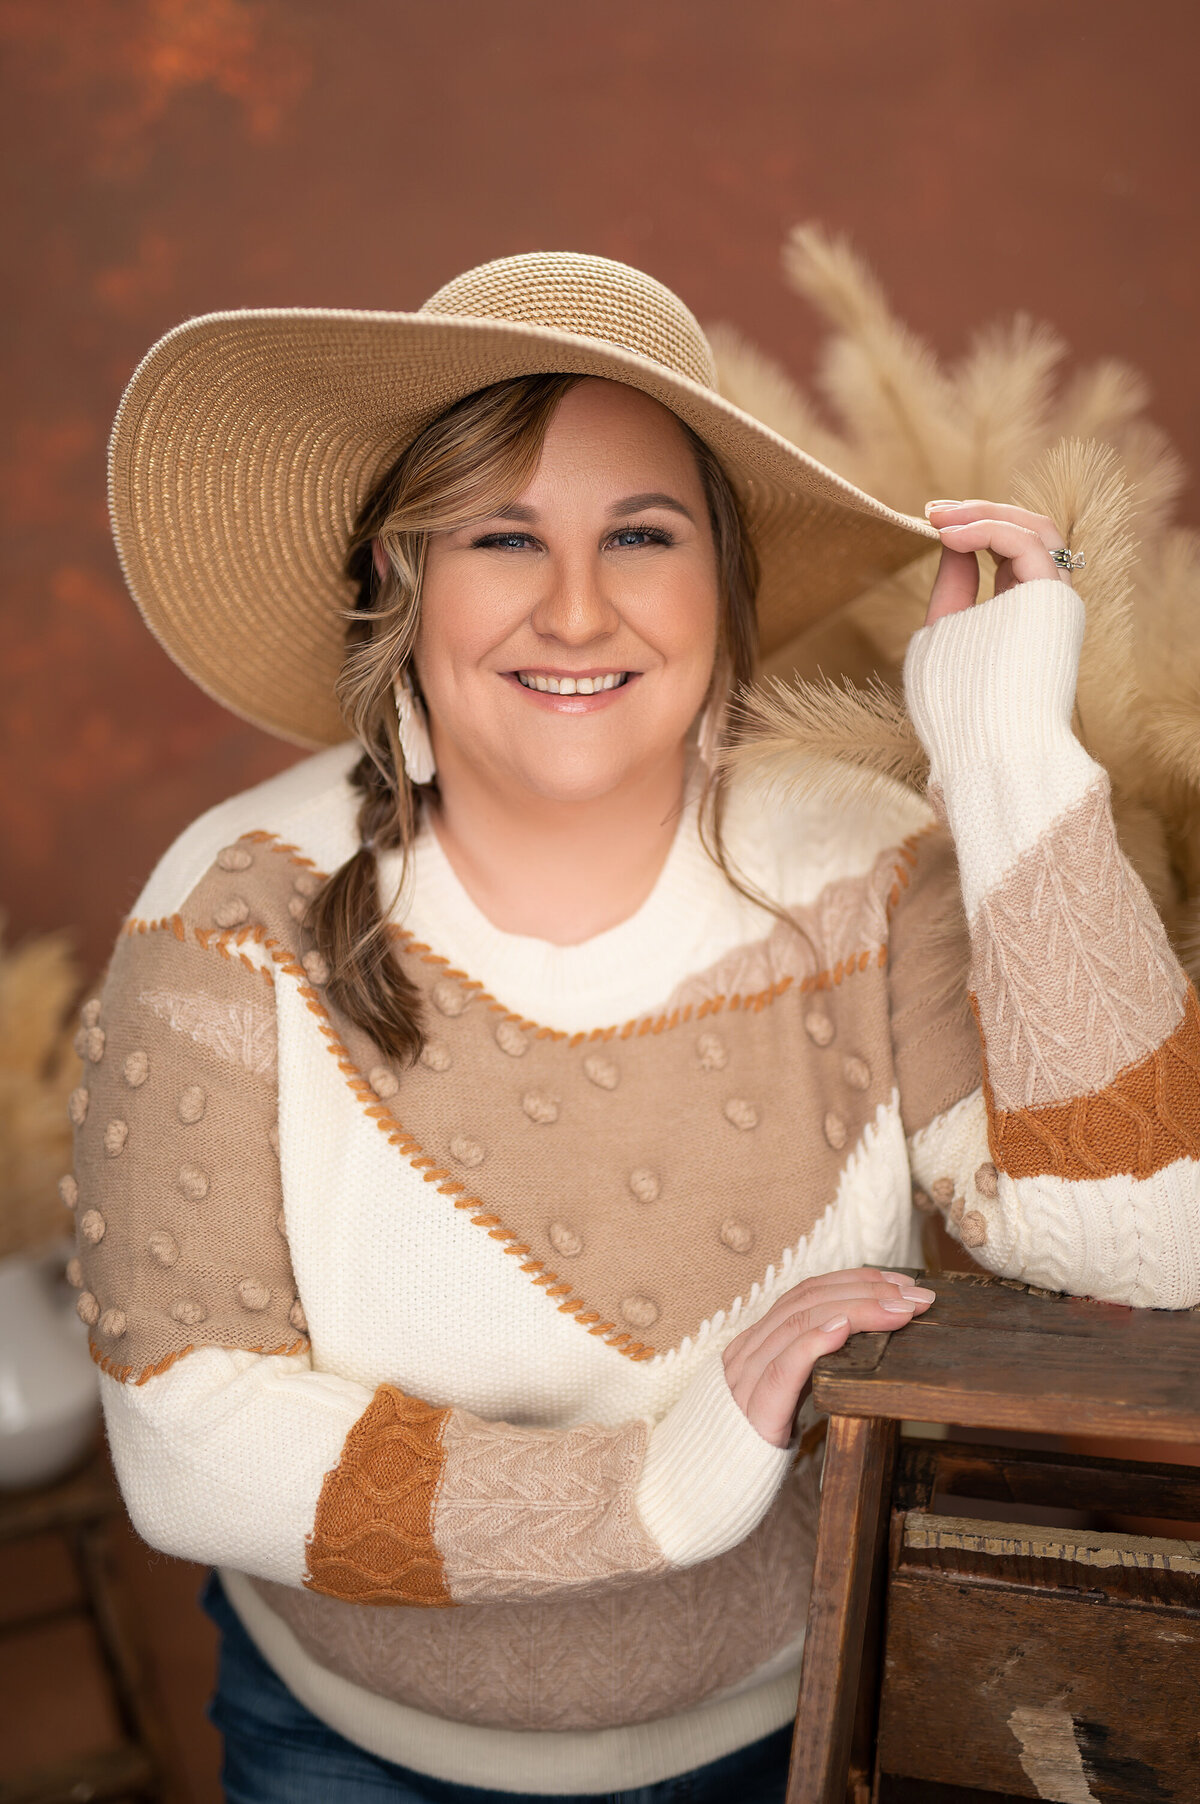 A professional headshot of a woman wearing a color block sweater and floppy hat taken in our Waukesha, WI photo studio.